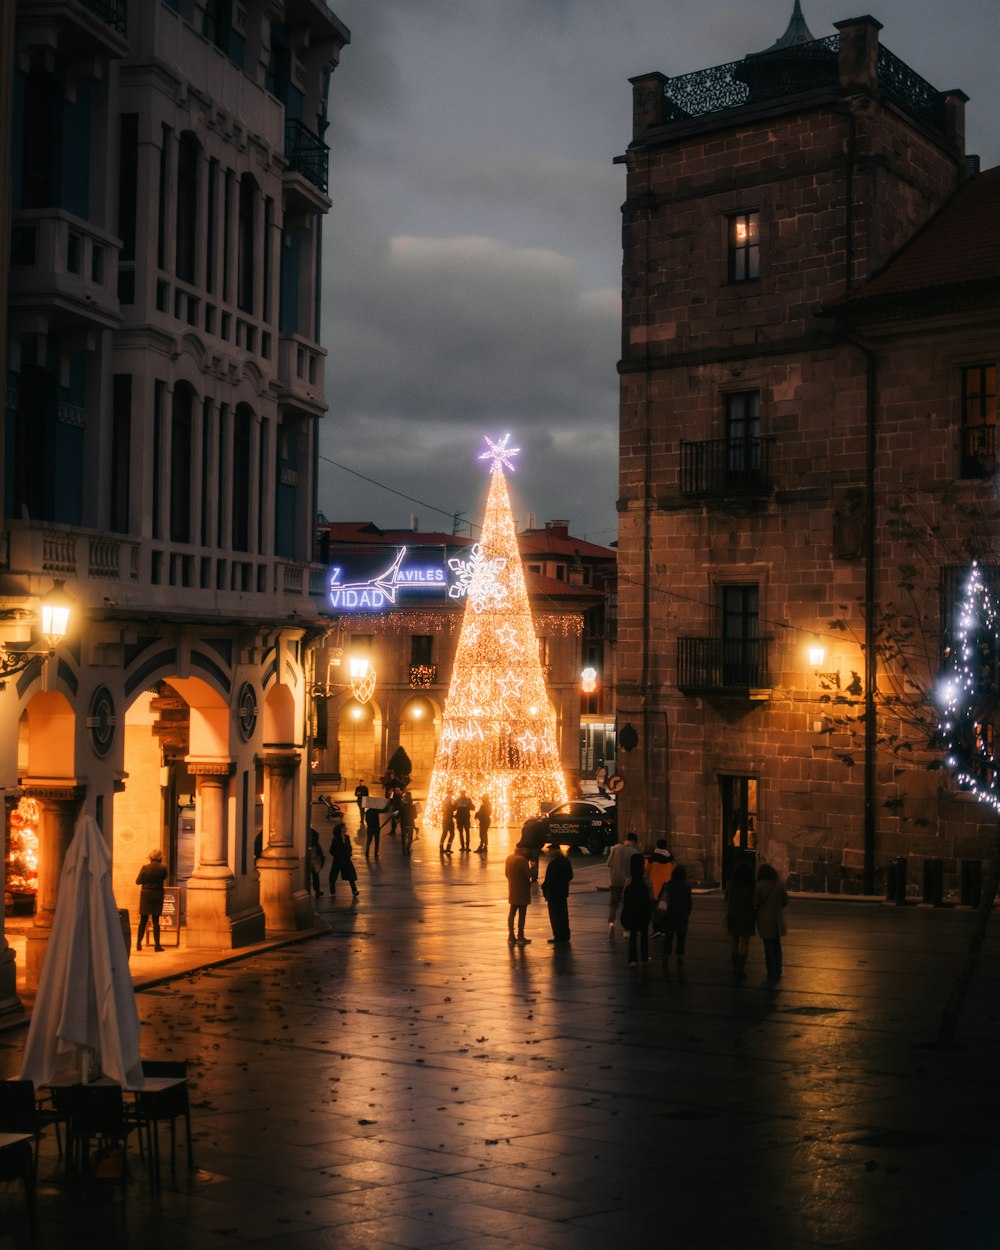 a christmas tree is lit up in the middle of a street